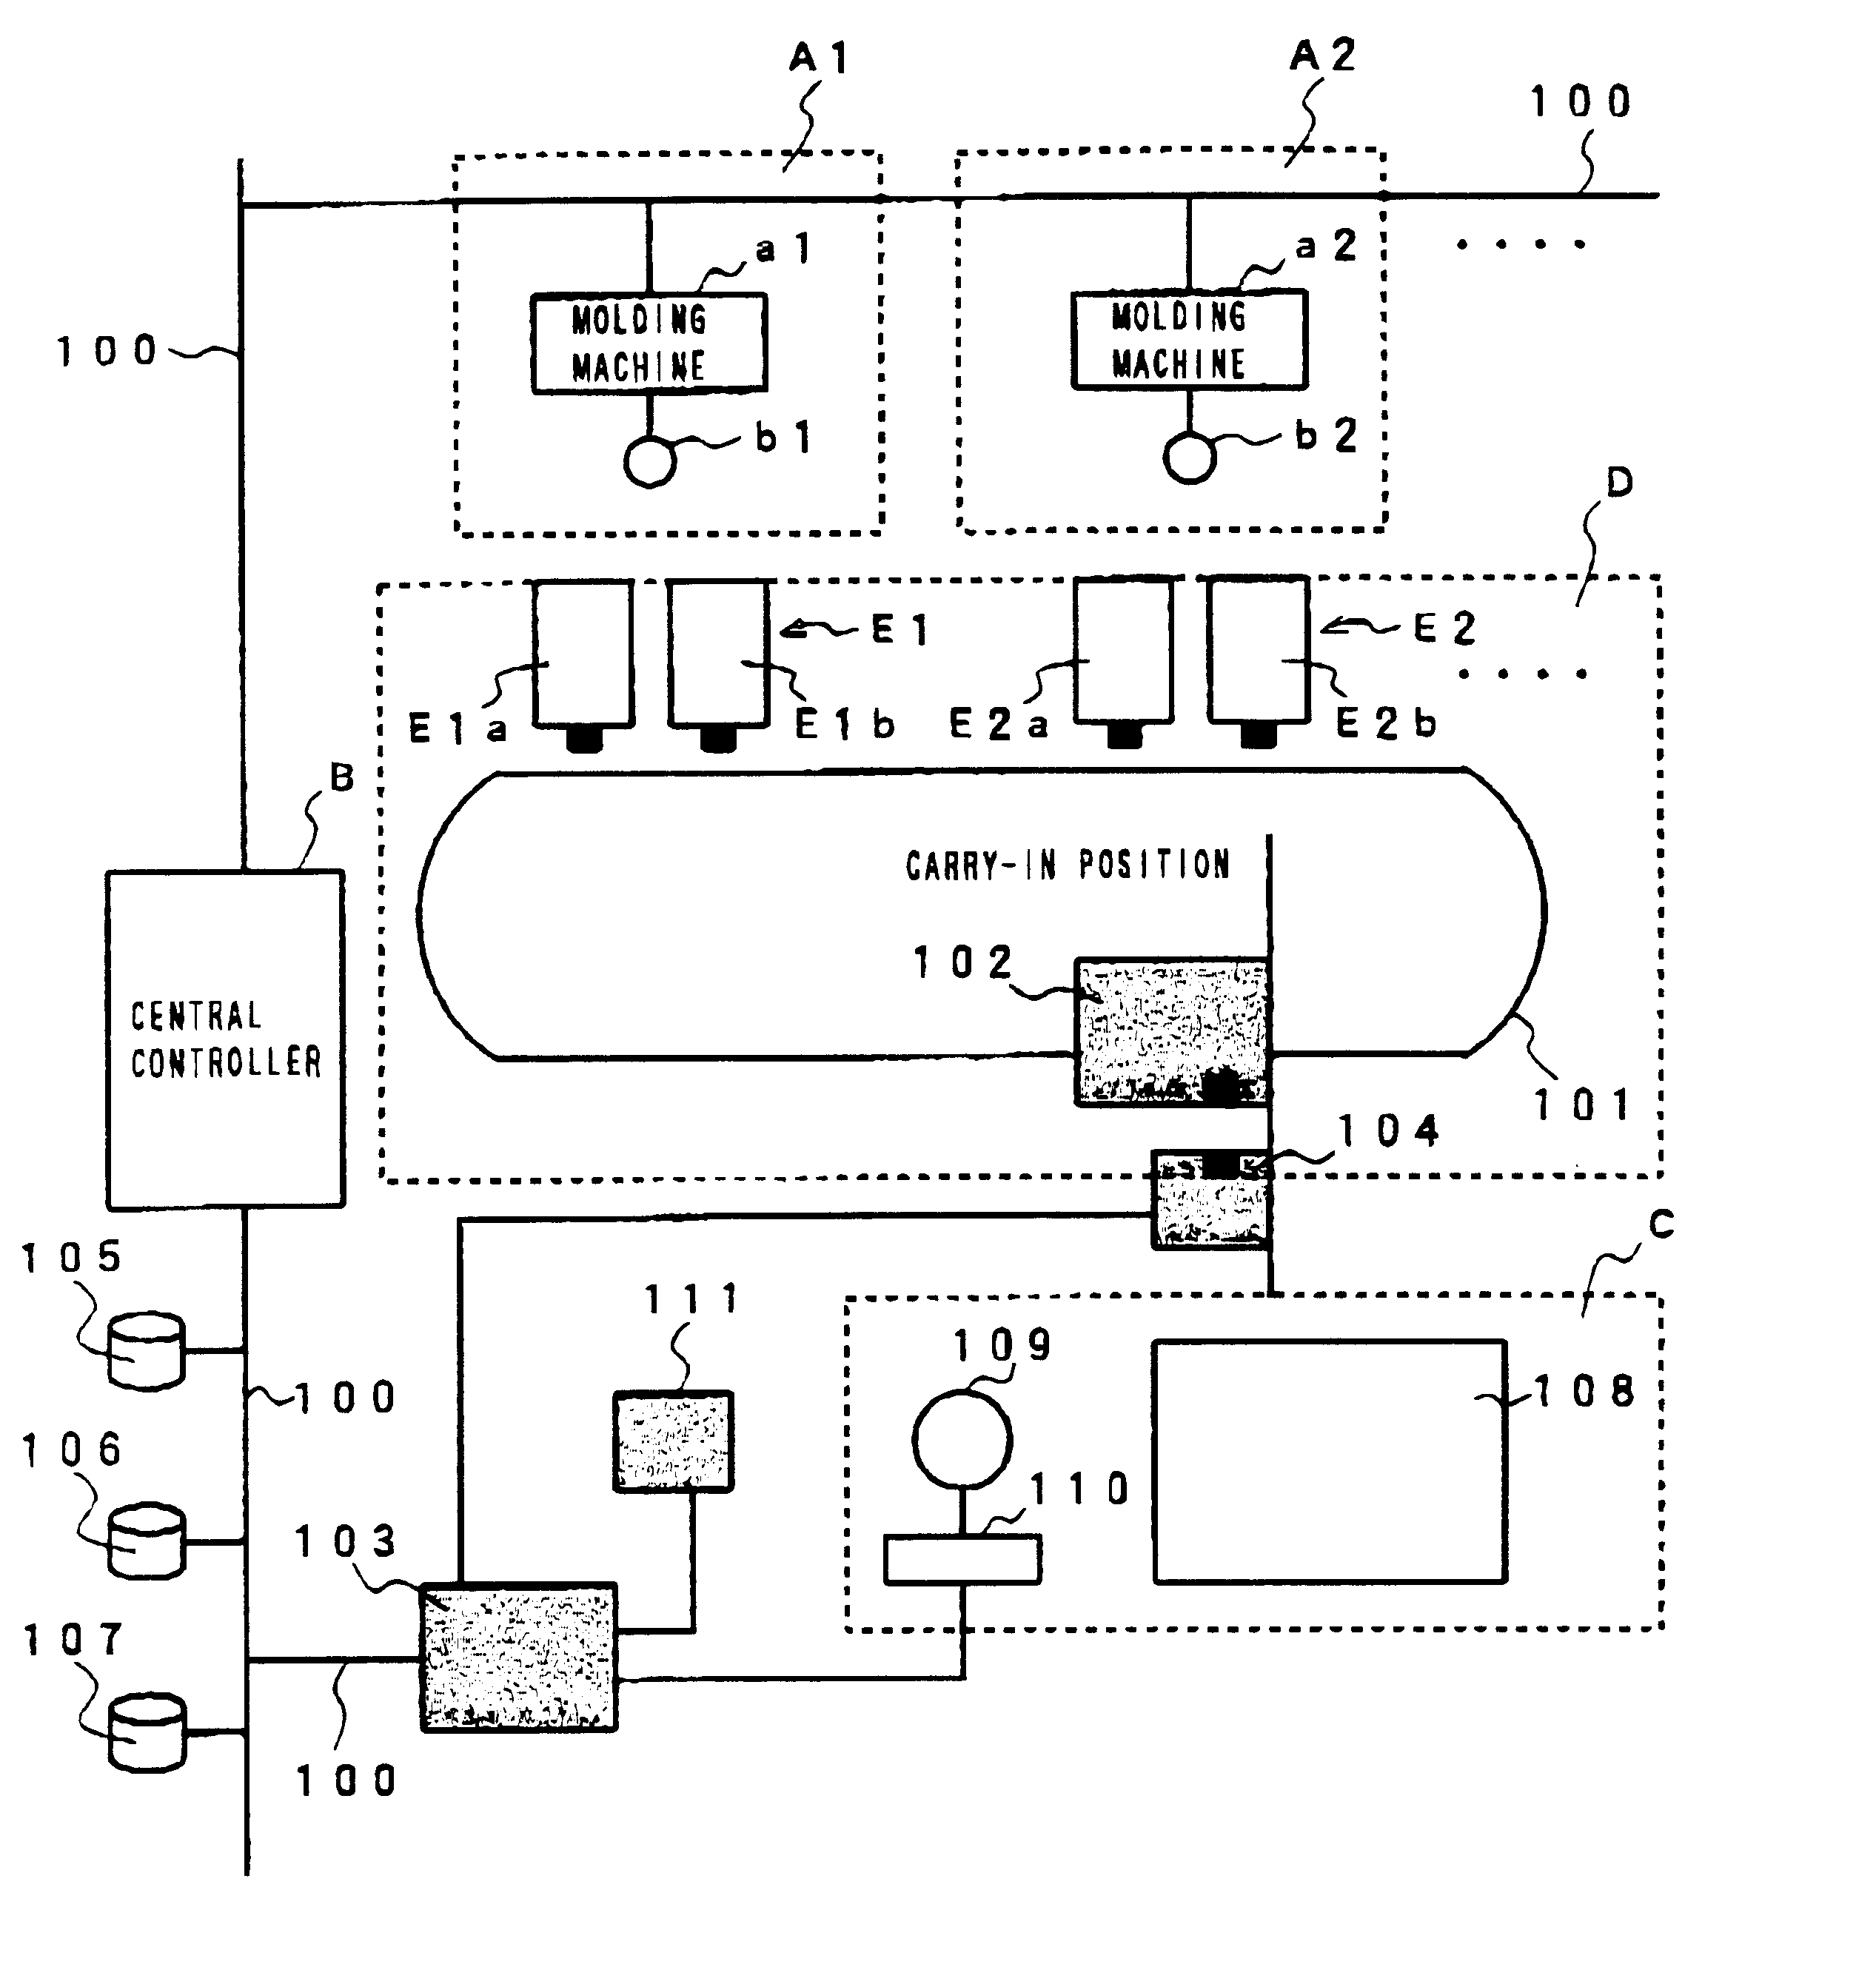 Information transmitting system for use in factory